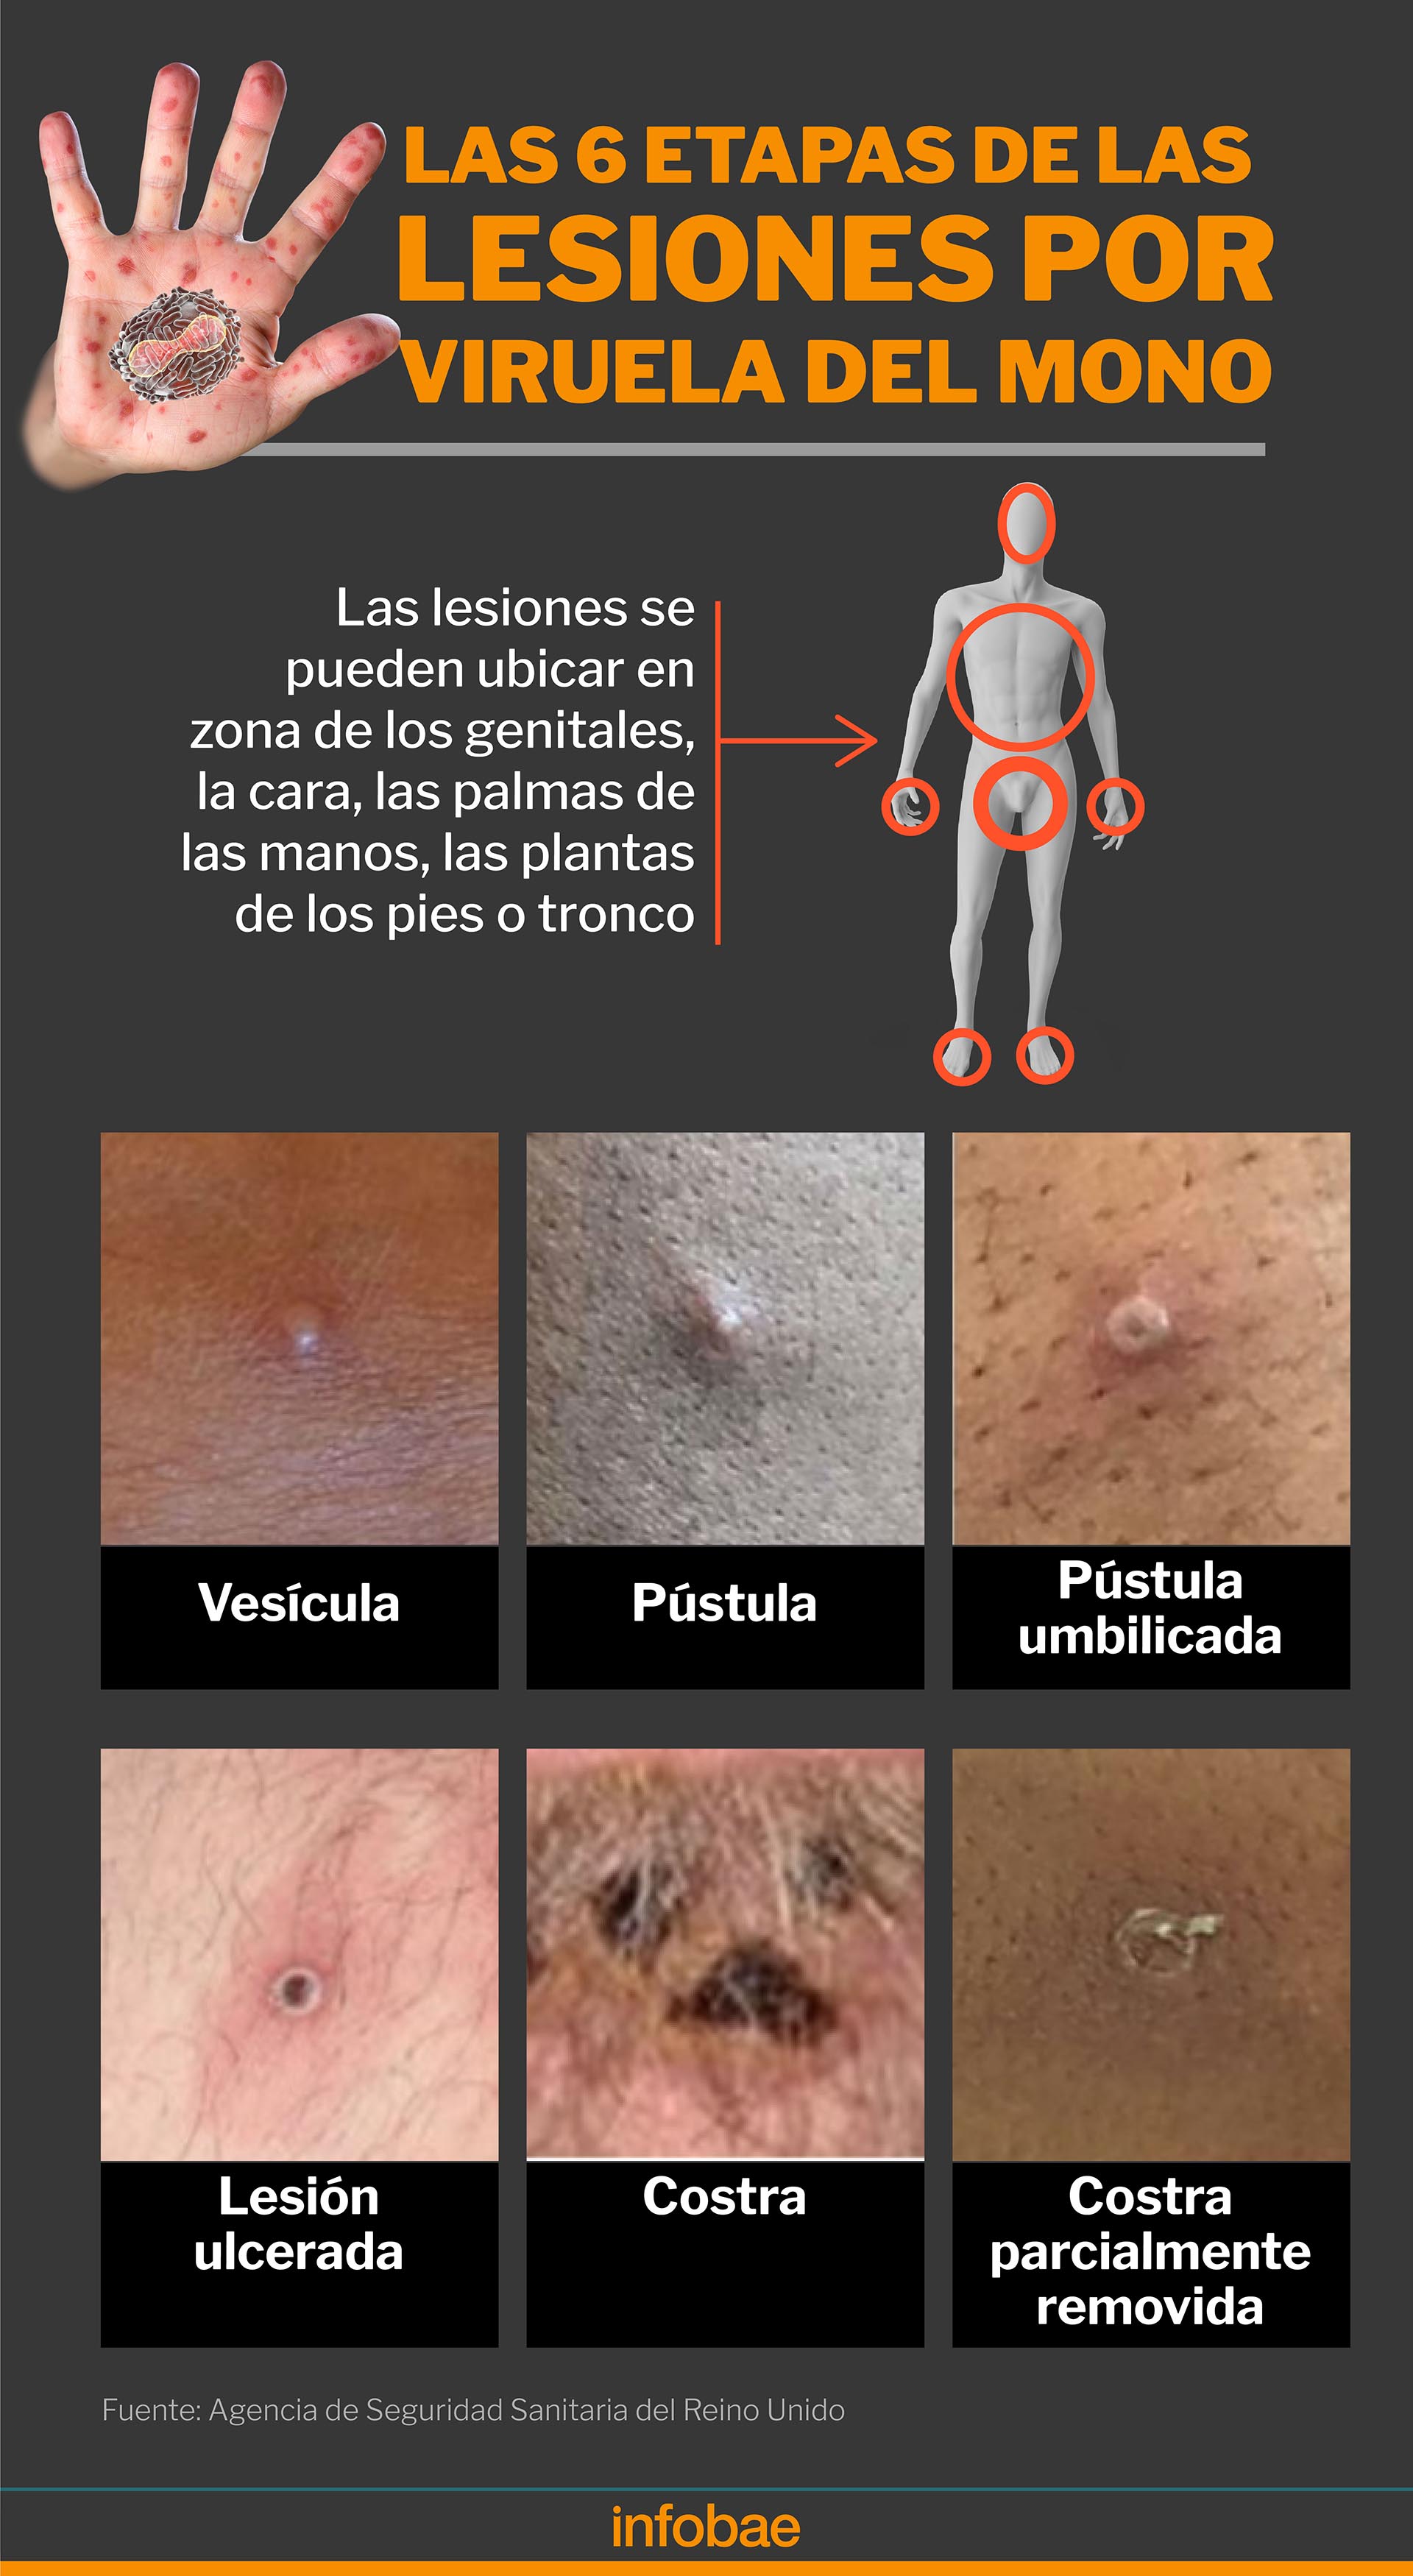 These are the stages of skin lesions in people affected by Mpox/Marcelo Regalado